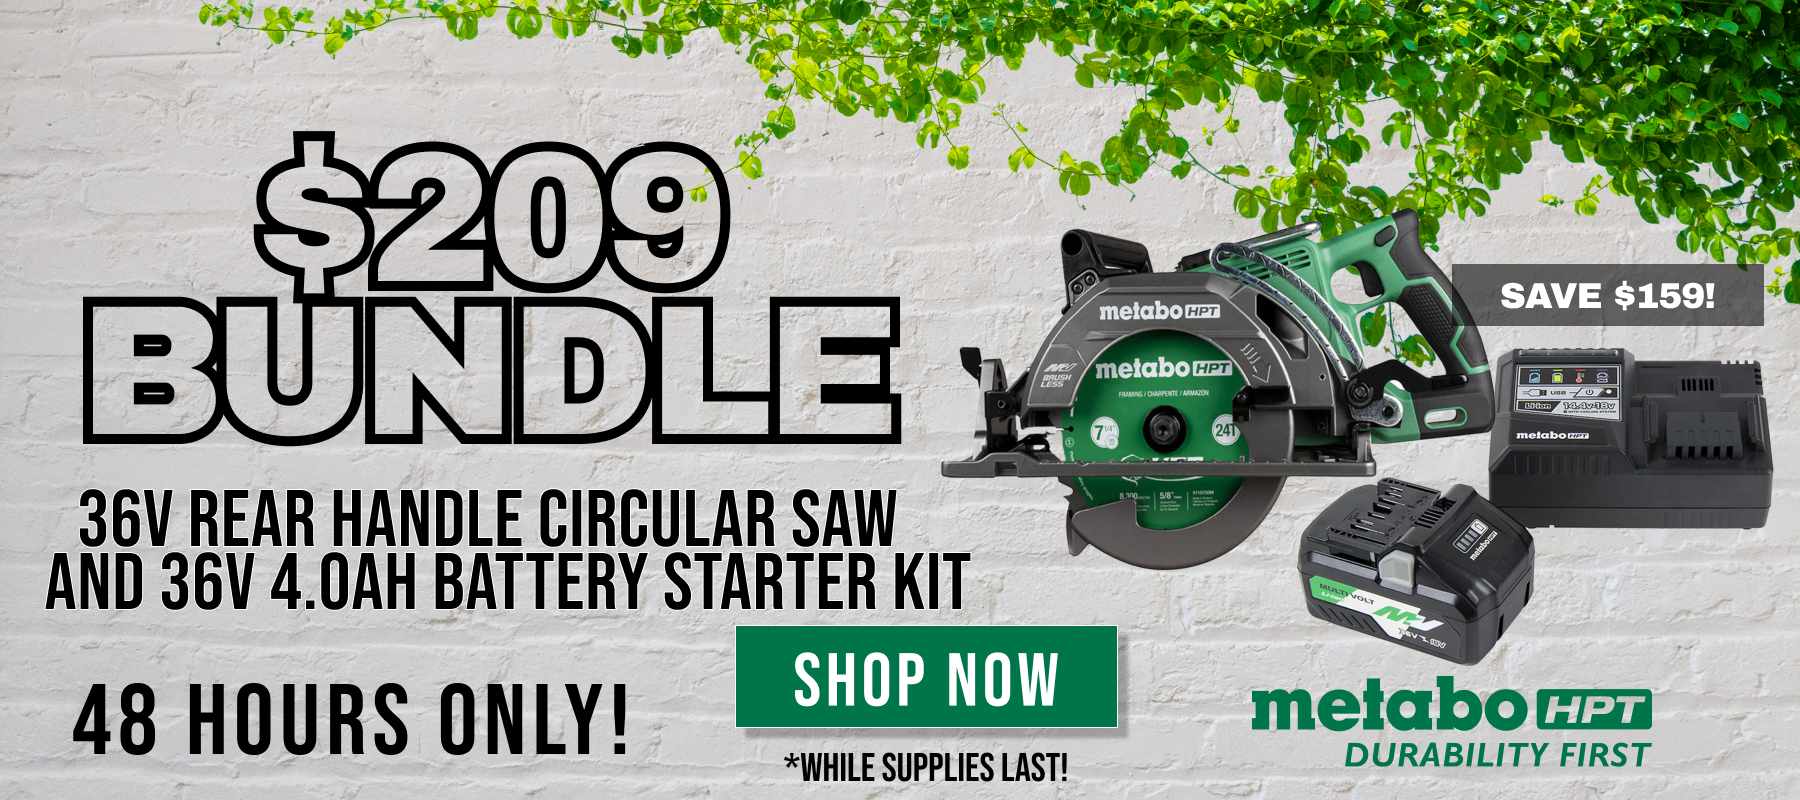 Metabo HPT // $209 Bundle // 48 Hours Only! // Save $159! // 36V Rear Handle Circular Saw and 36V 4.0AH Battery Starter Kit // While Supplies Last! // SHOP NOW